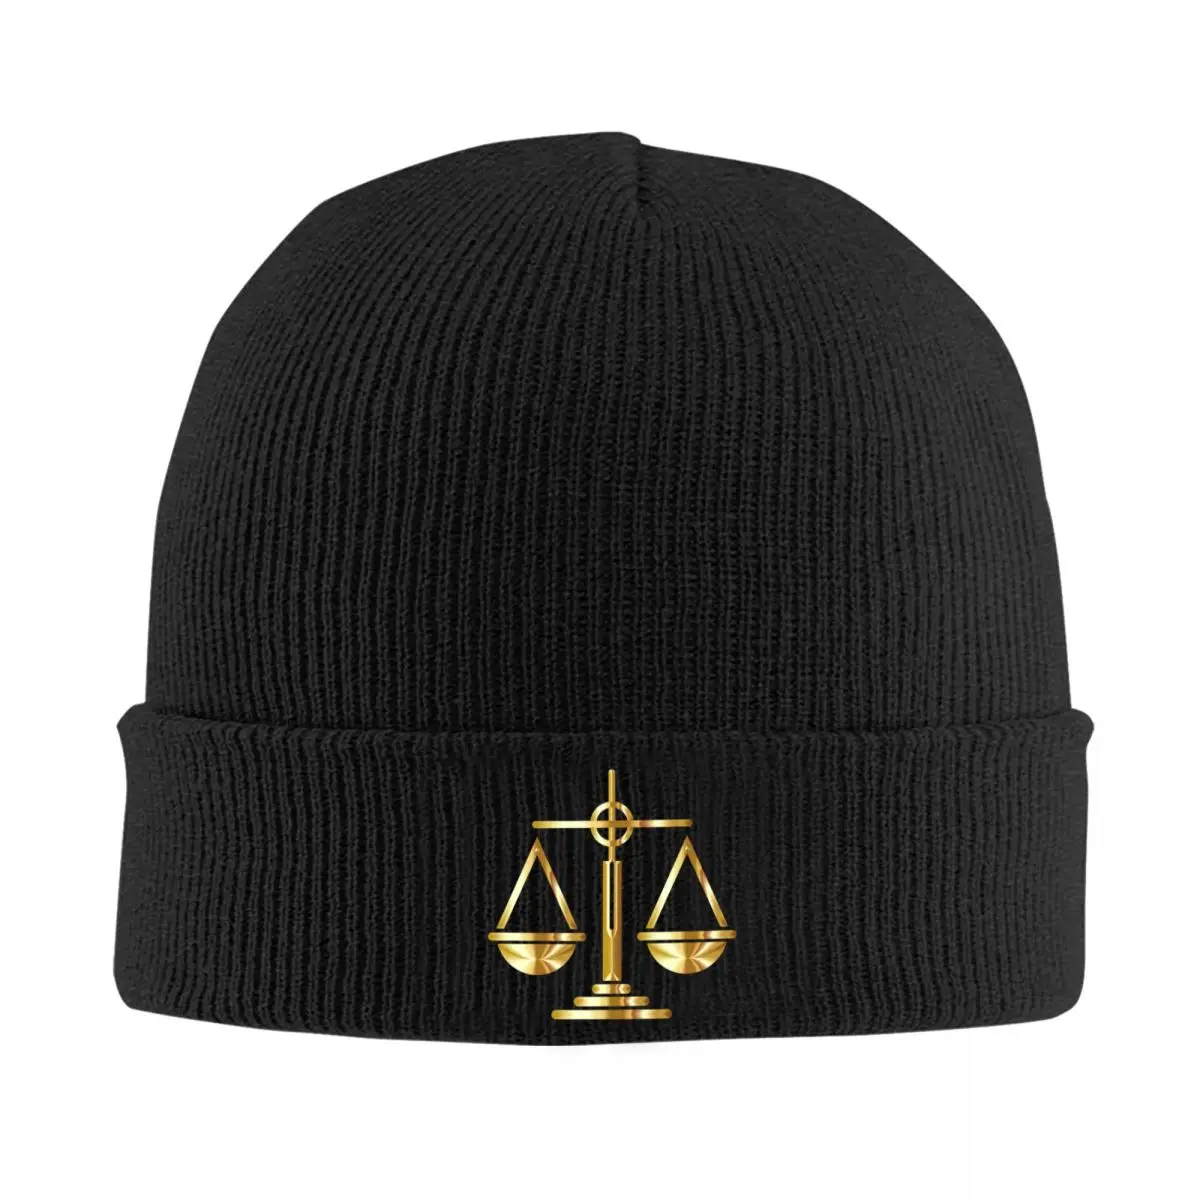 

Gold Scales Of Justice Law Logo Skullies Beanies Caps Unisex Winter Warm Knit Hat Street Adult Lawyer Legal Party Bonnet Hats